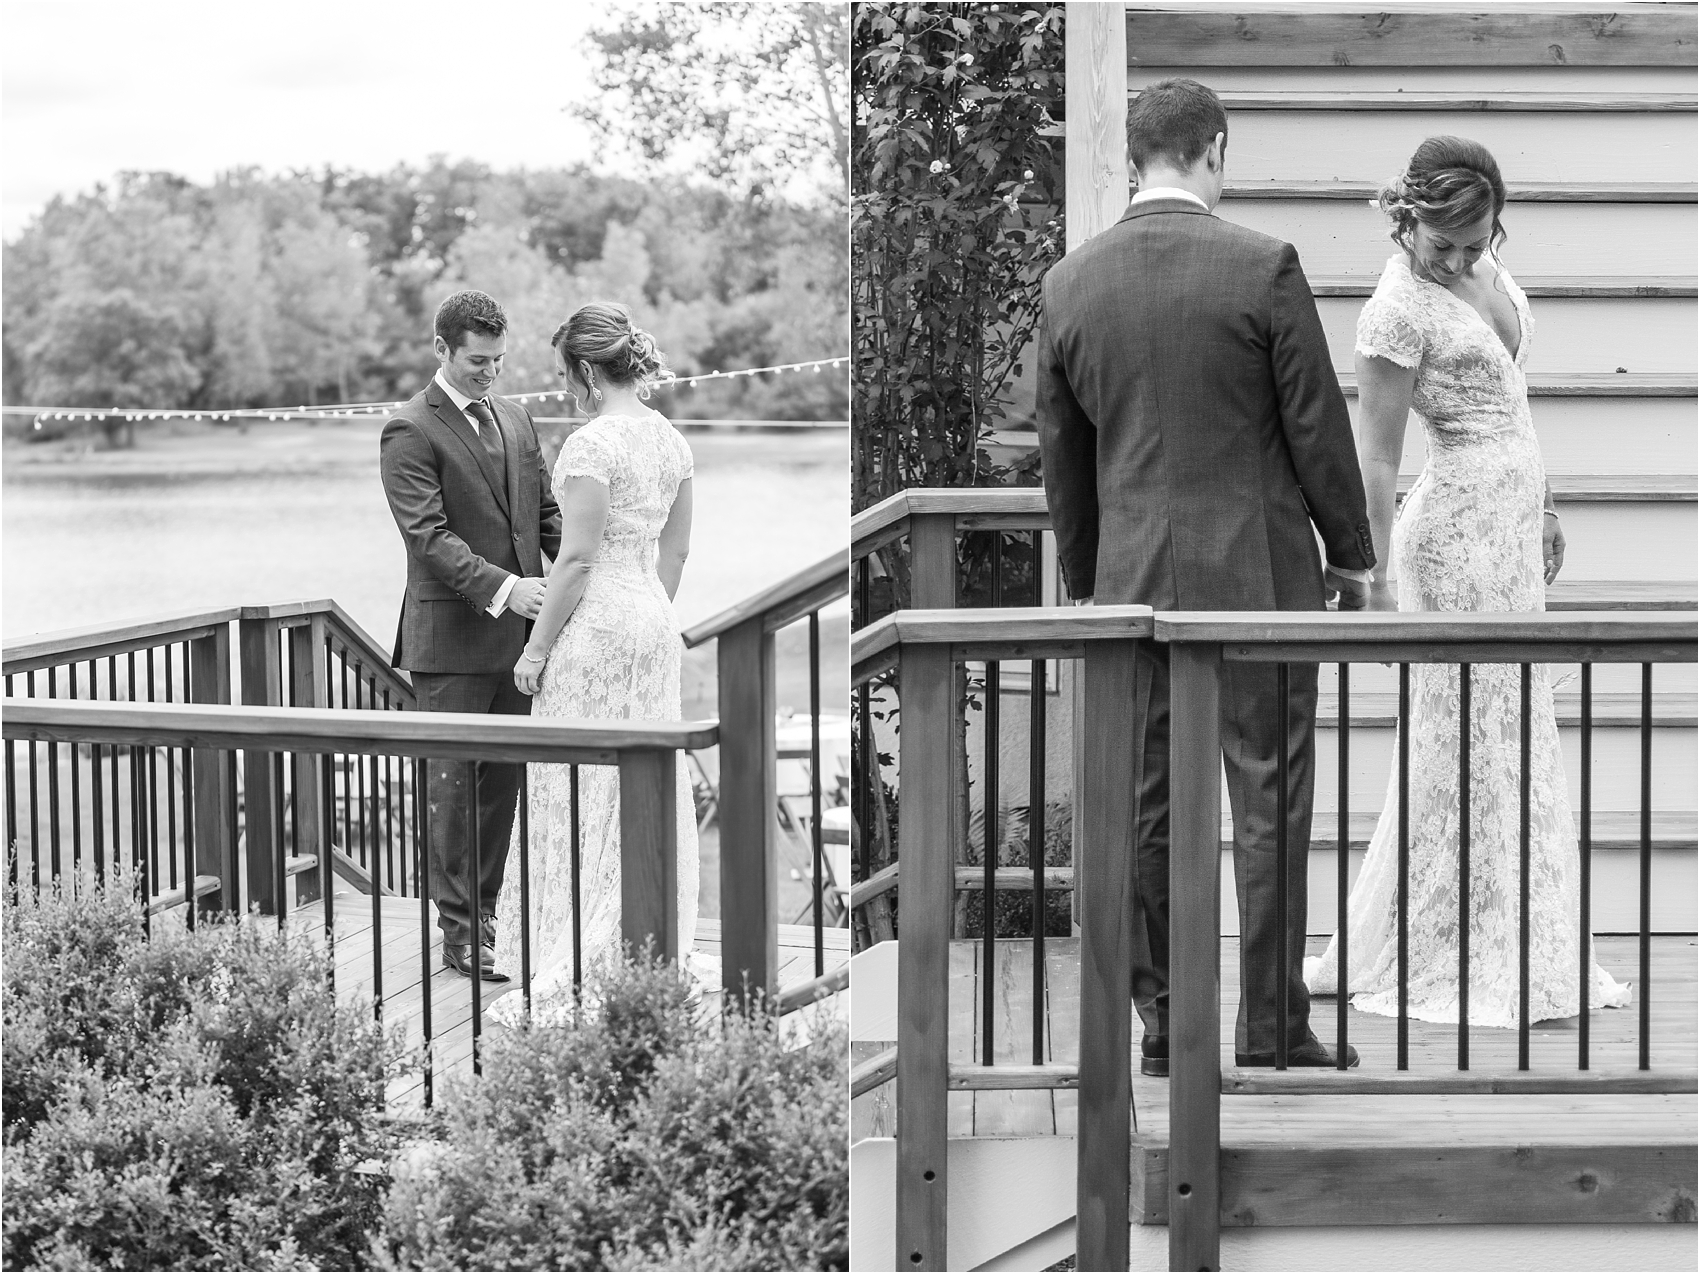 romantic-intimate-backyard-wedding-photos-at-private-estate-in-ann-arbor-mi-by-courtney-carolyn-photography_0028.jpg